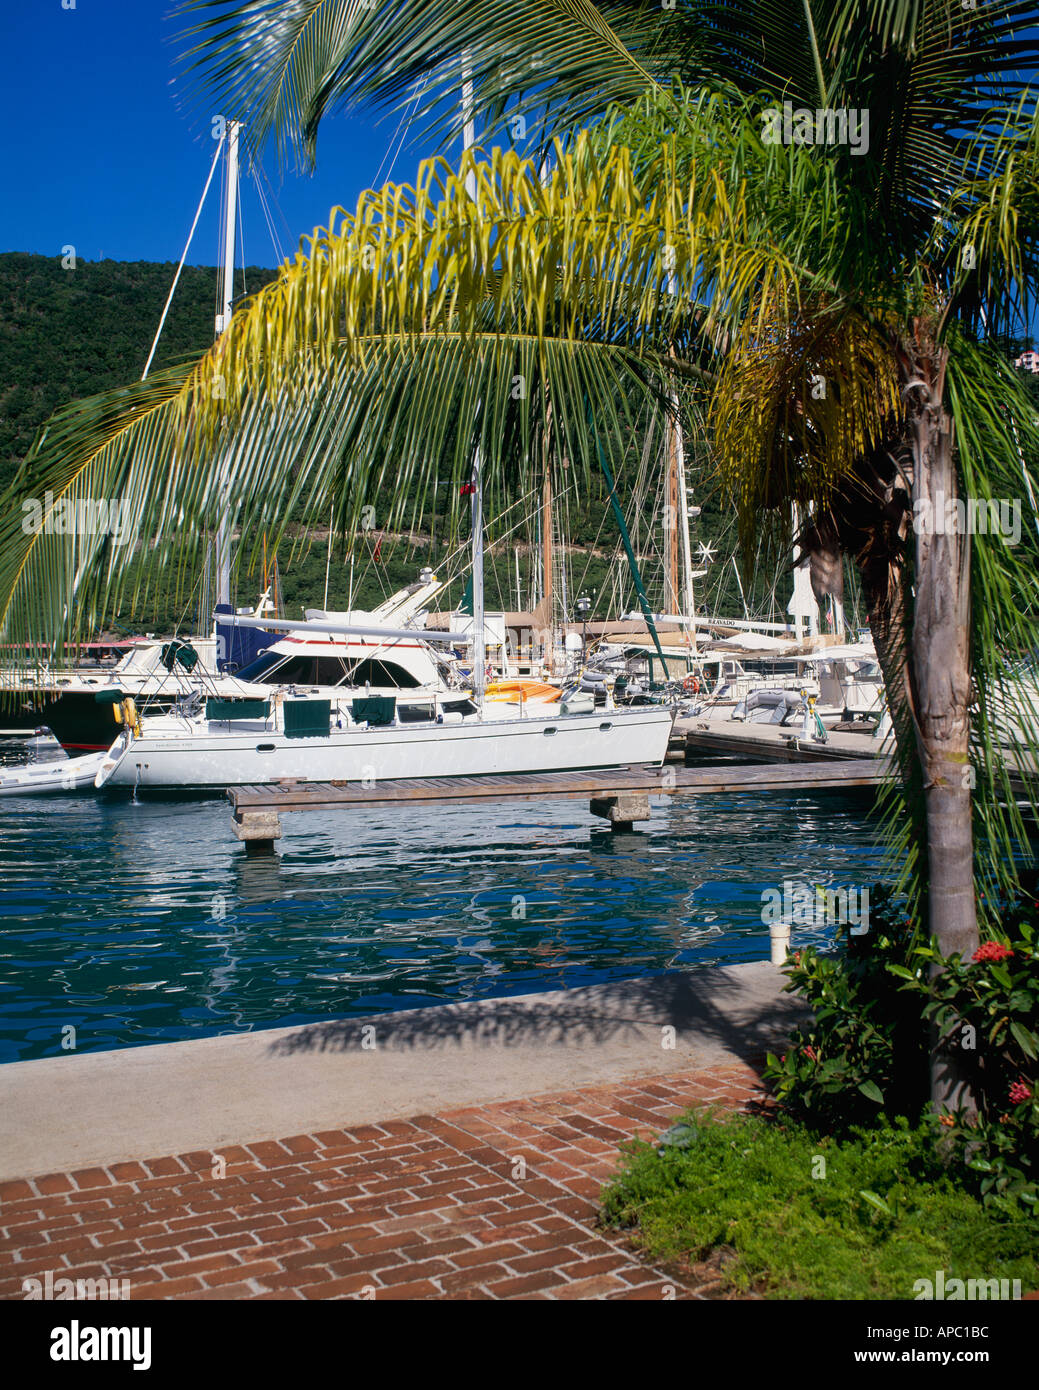 'Sopers Hole' Wharf 'Pussers Landing' 'Frenchmans Cay' West End Tortola British Virgin Islands Caribbean Stock Photo